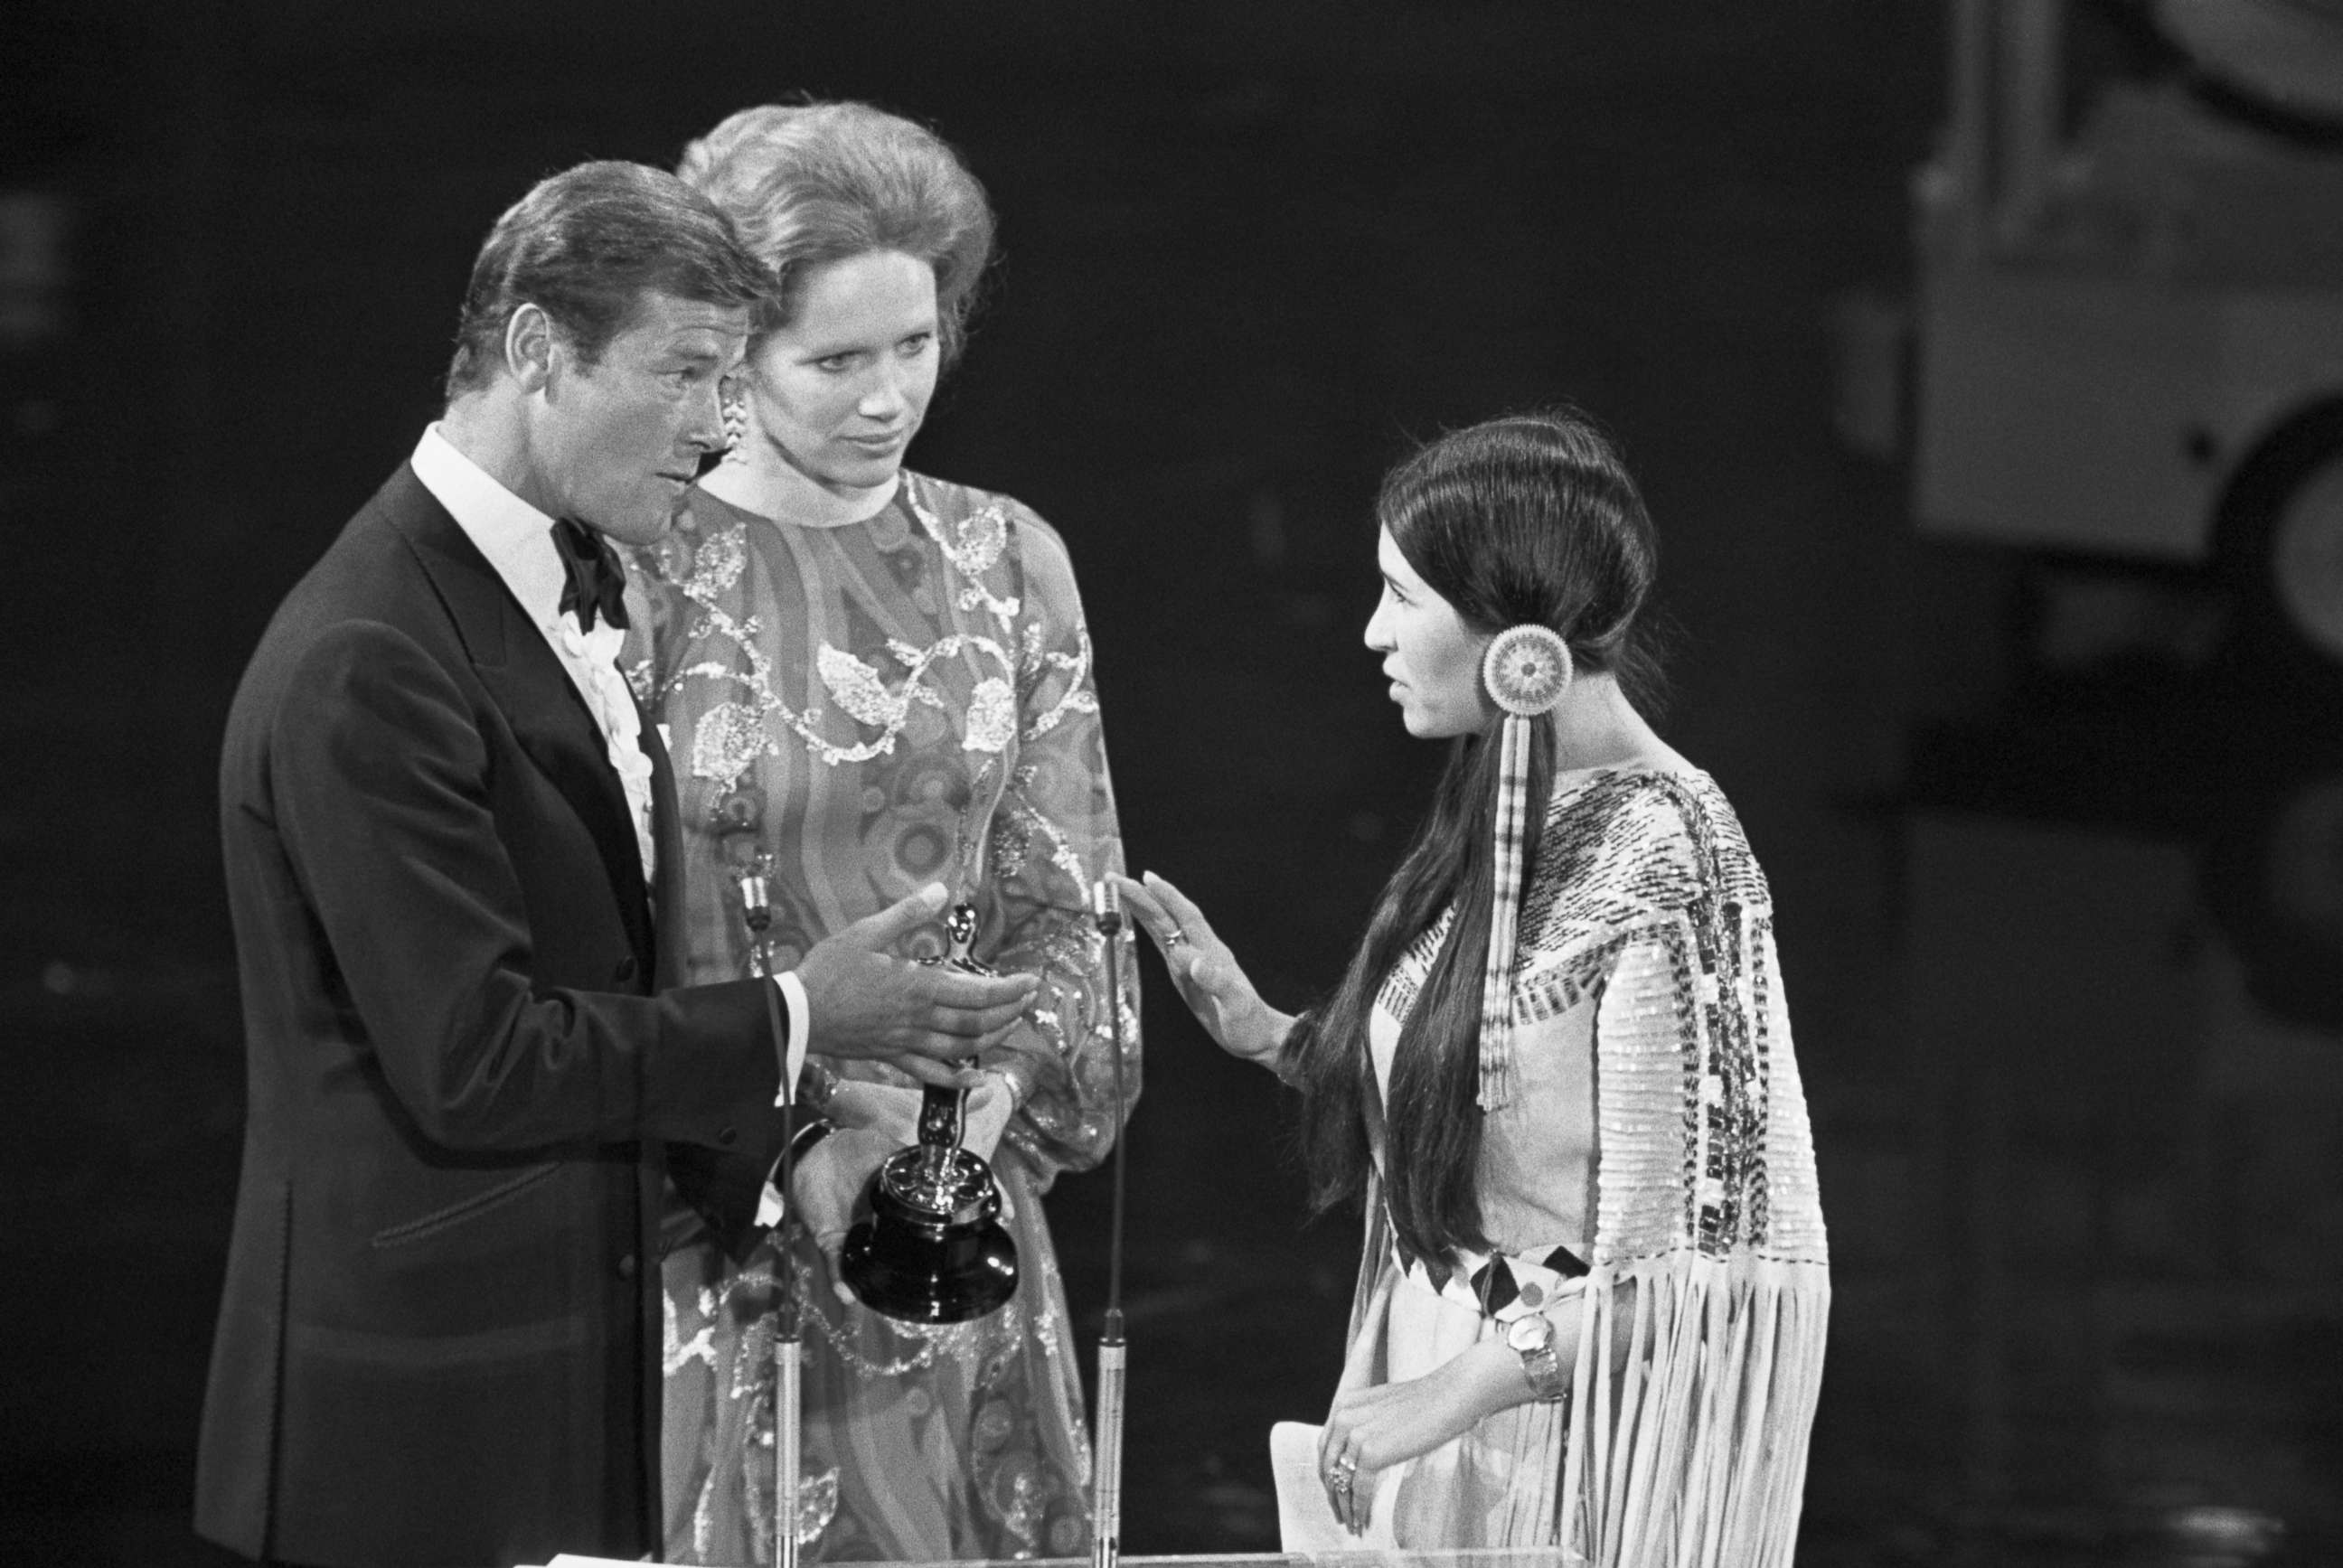 PHOTO: Sacheen Littlefeather refuses the Oscar for Best Actor on behalf of Marlon Brando for his role in "The Godfather" from presenters Roger Moore and Liv Ullman at the Academy Awards, Mar. 27, 1993, in Los Angeles.